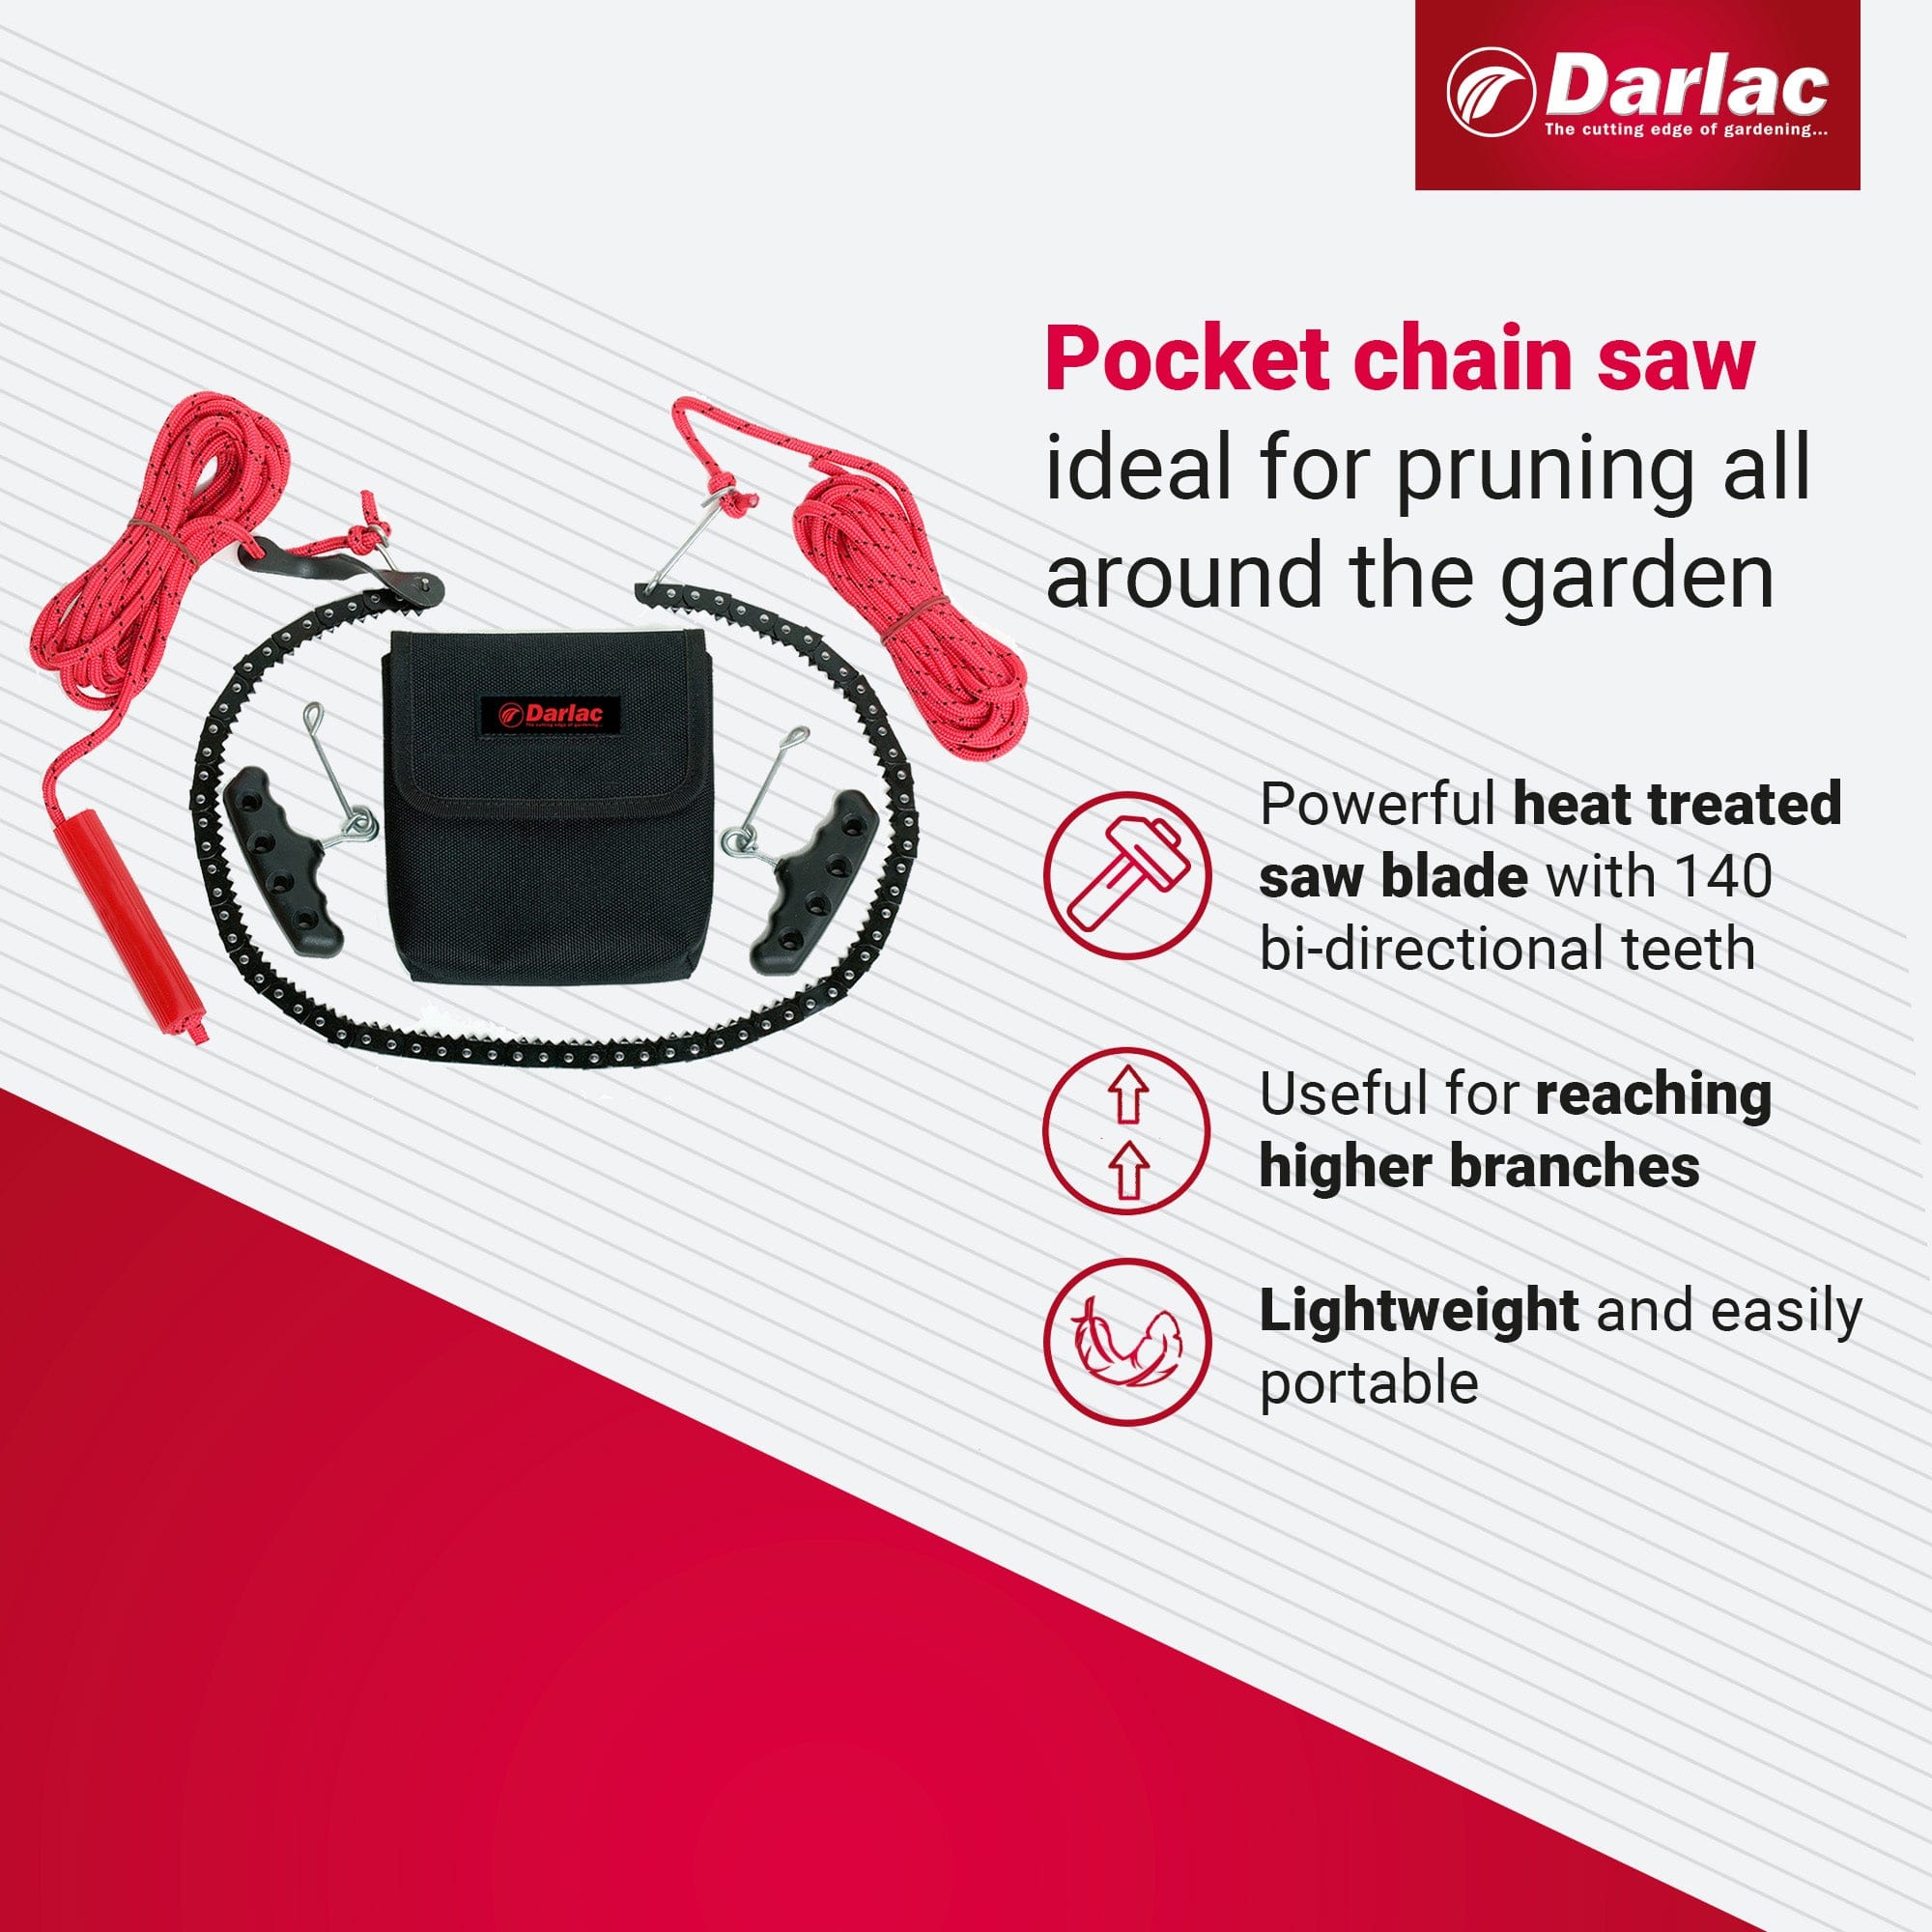 dt-brown HARDWARE Darlac Pocket Chain Saw